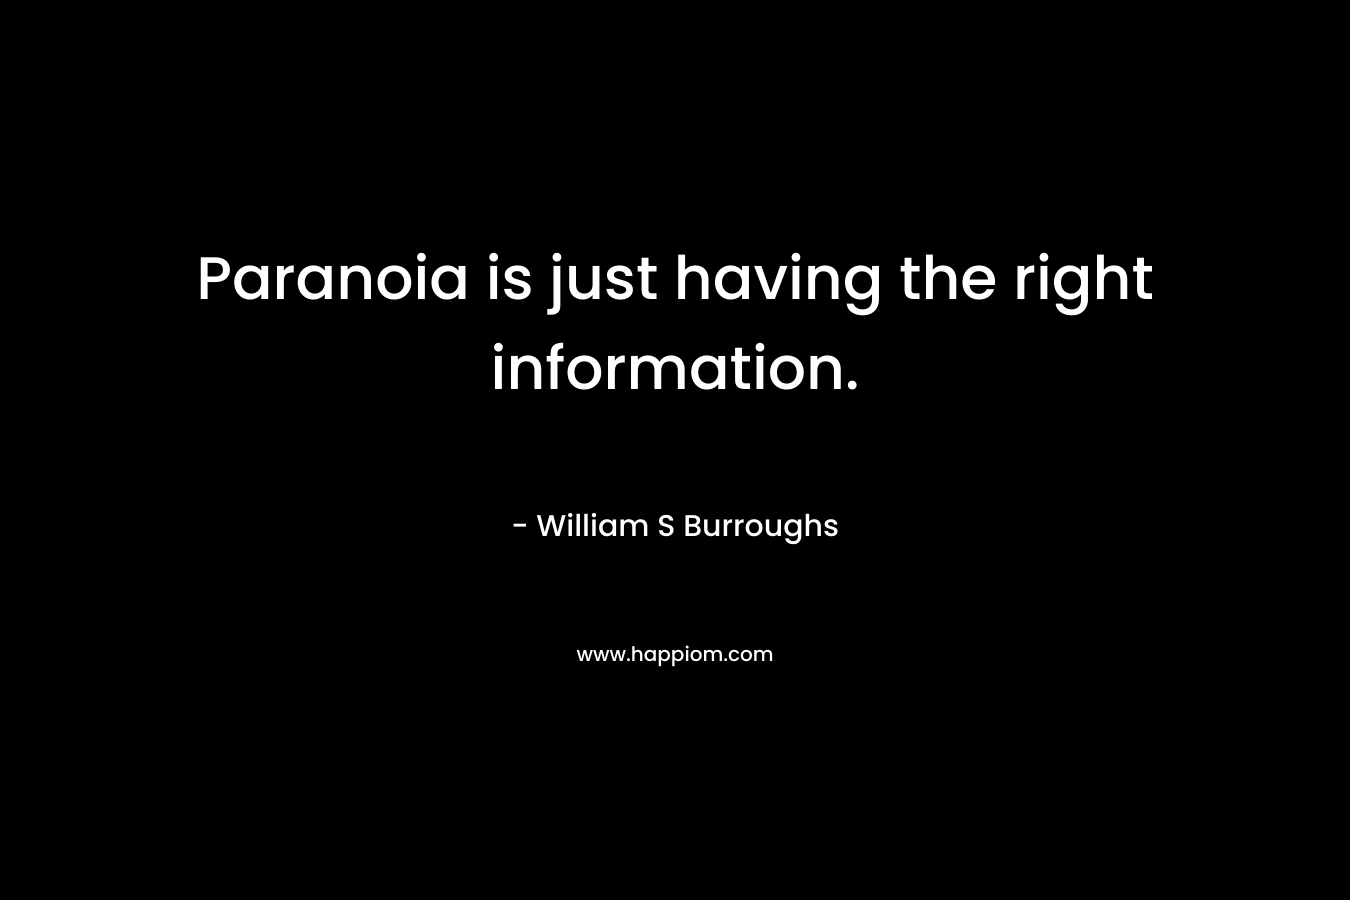 Paranoia is just having the right information. – William S Burroughs